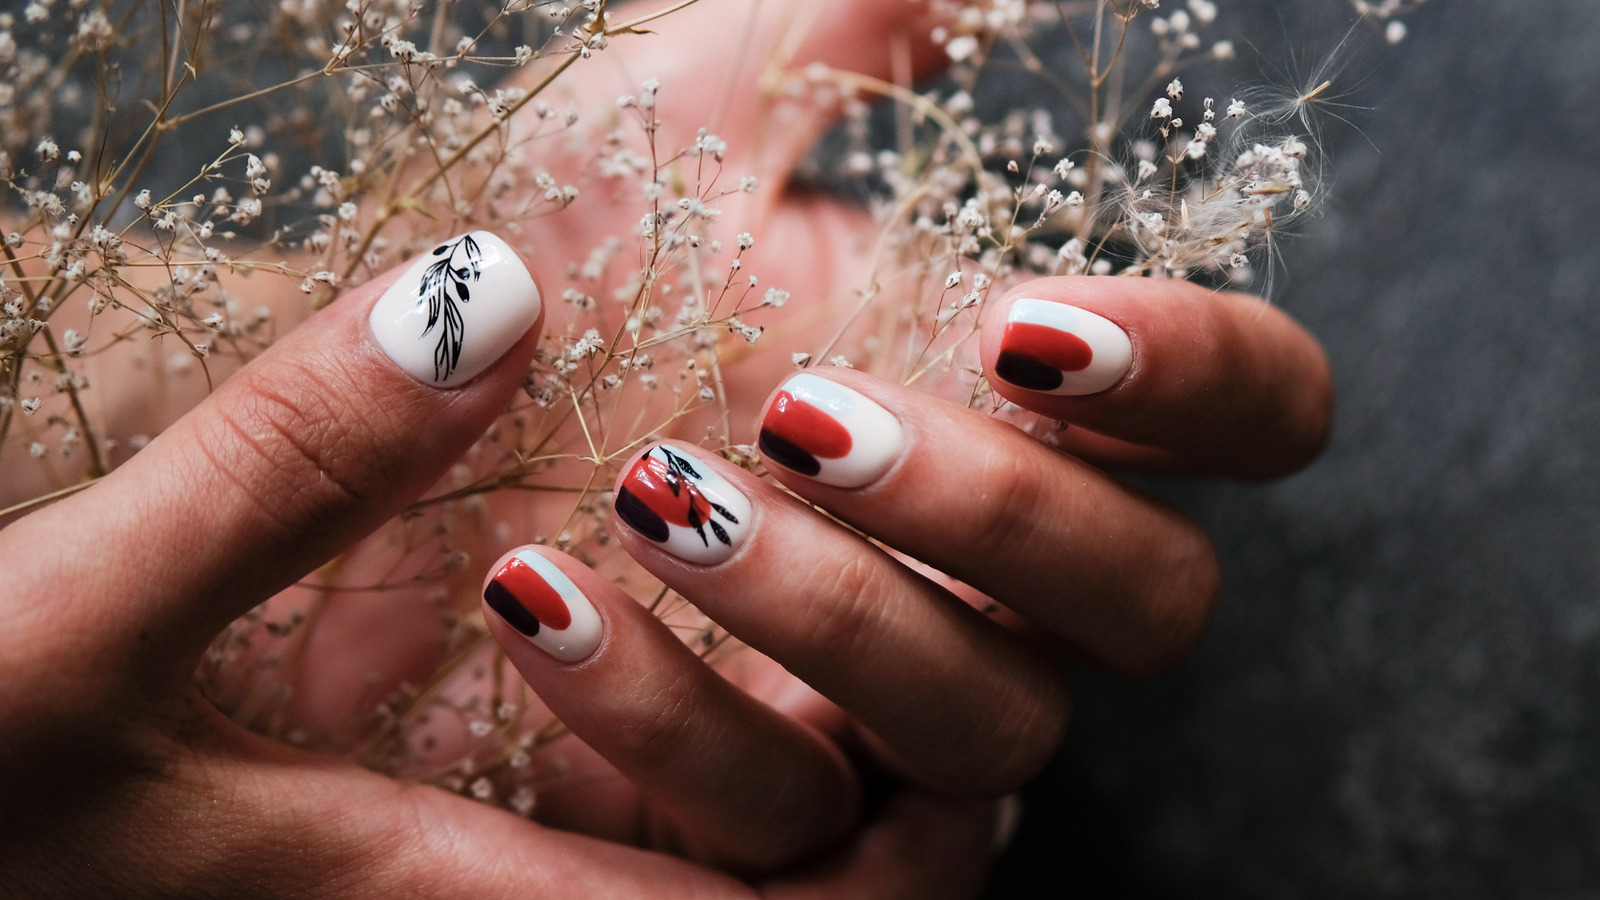 1. Abstract Nail Art Designs on Pinterest - wide 10